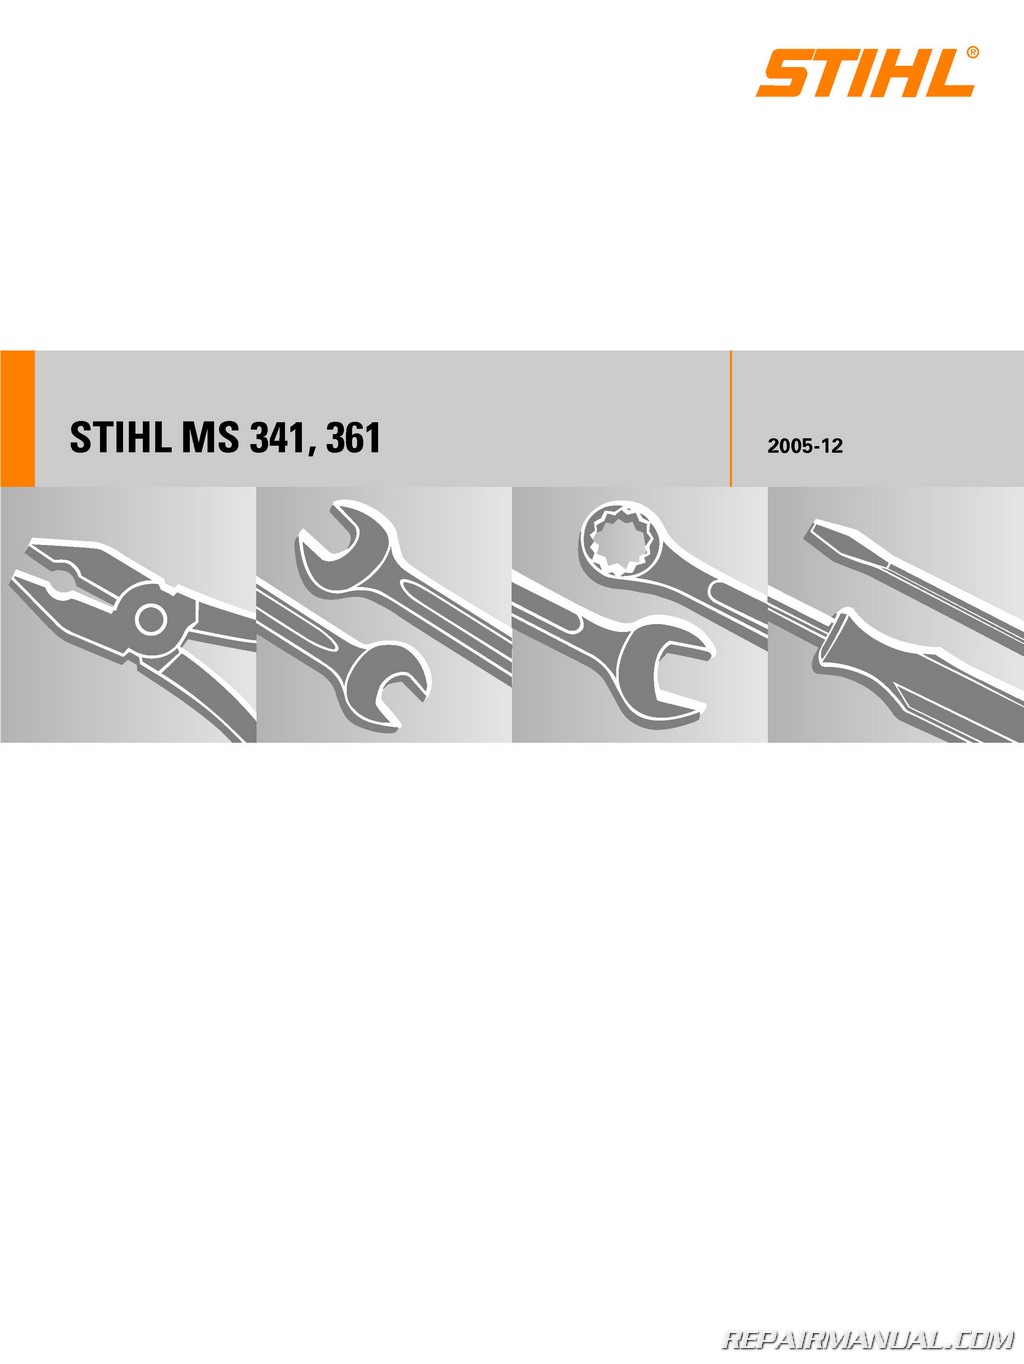 Guide Bar & 2 Chain Fits STIHL MS341 MS342 MS360 MS361 MS362 MS390 MS391 